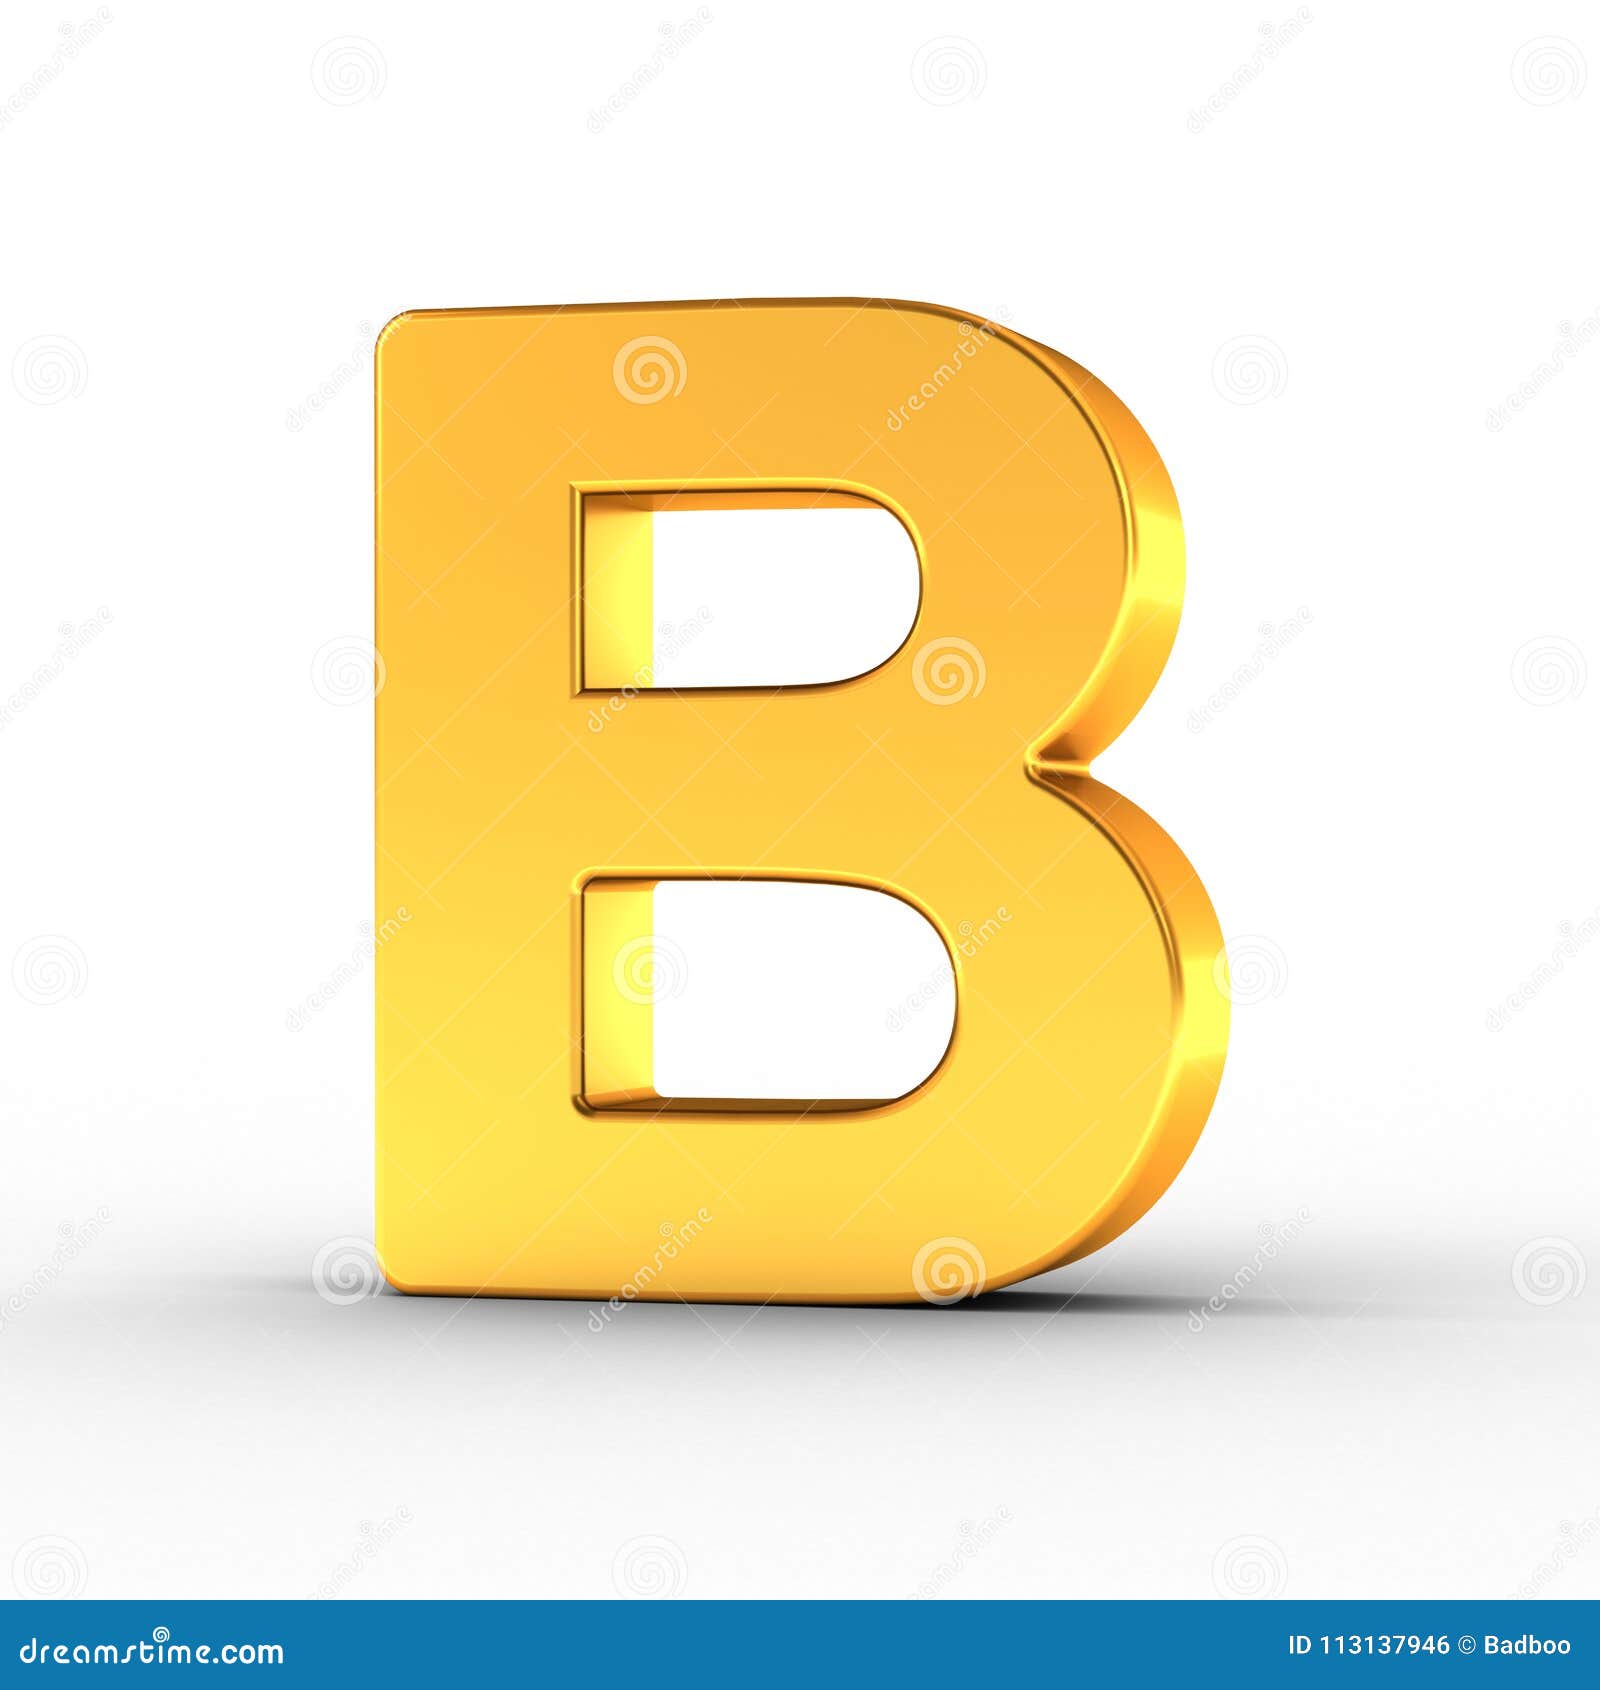 The Letter B As A Polished Golden Object With Clipping Path Stock  Illustration - Illustration Of Shape, Modern: 113137946